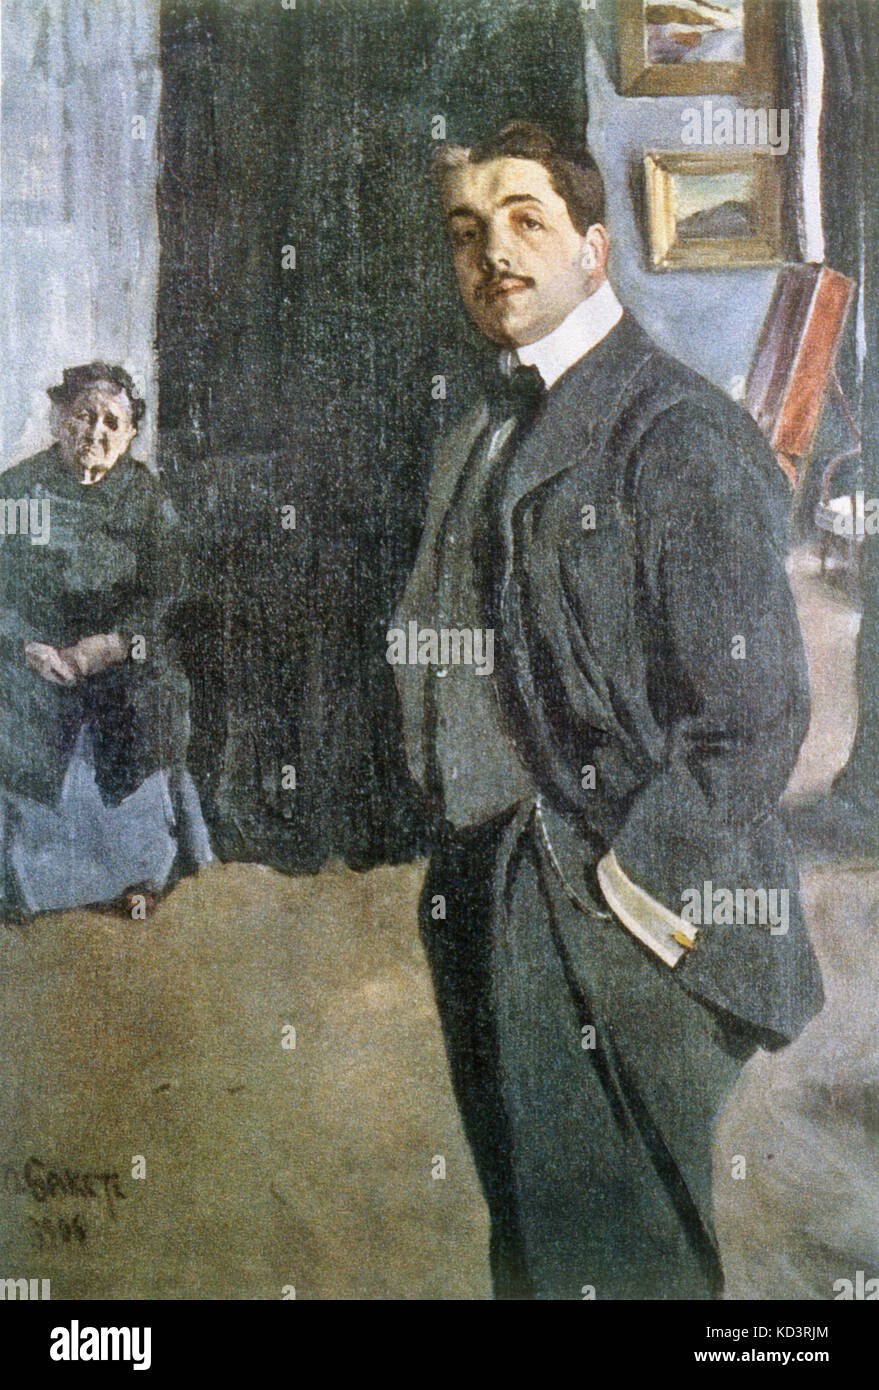 DIAGHILEV, Sergei after painting by  Leon Bakst (1866-1924) Standing, with his old nurse in background. Russian impresario, 1872-1929.Founder of  Ballets Russes . Ballet Russe, Ballets Russes Stock Photo